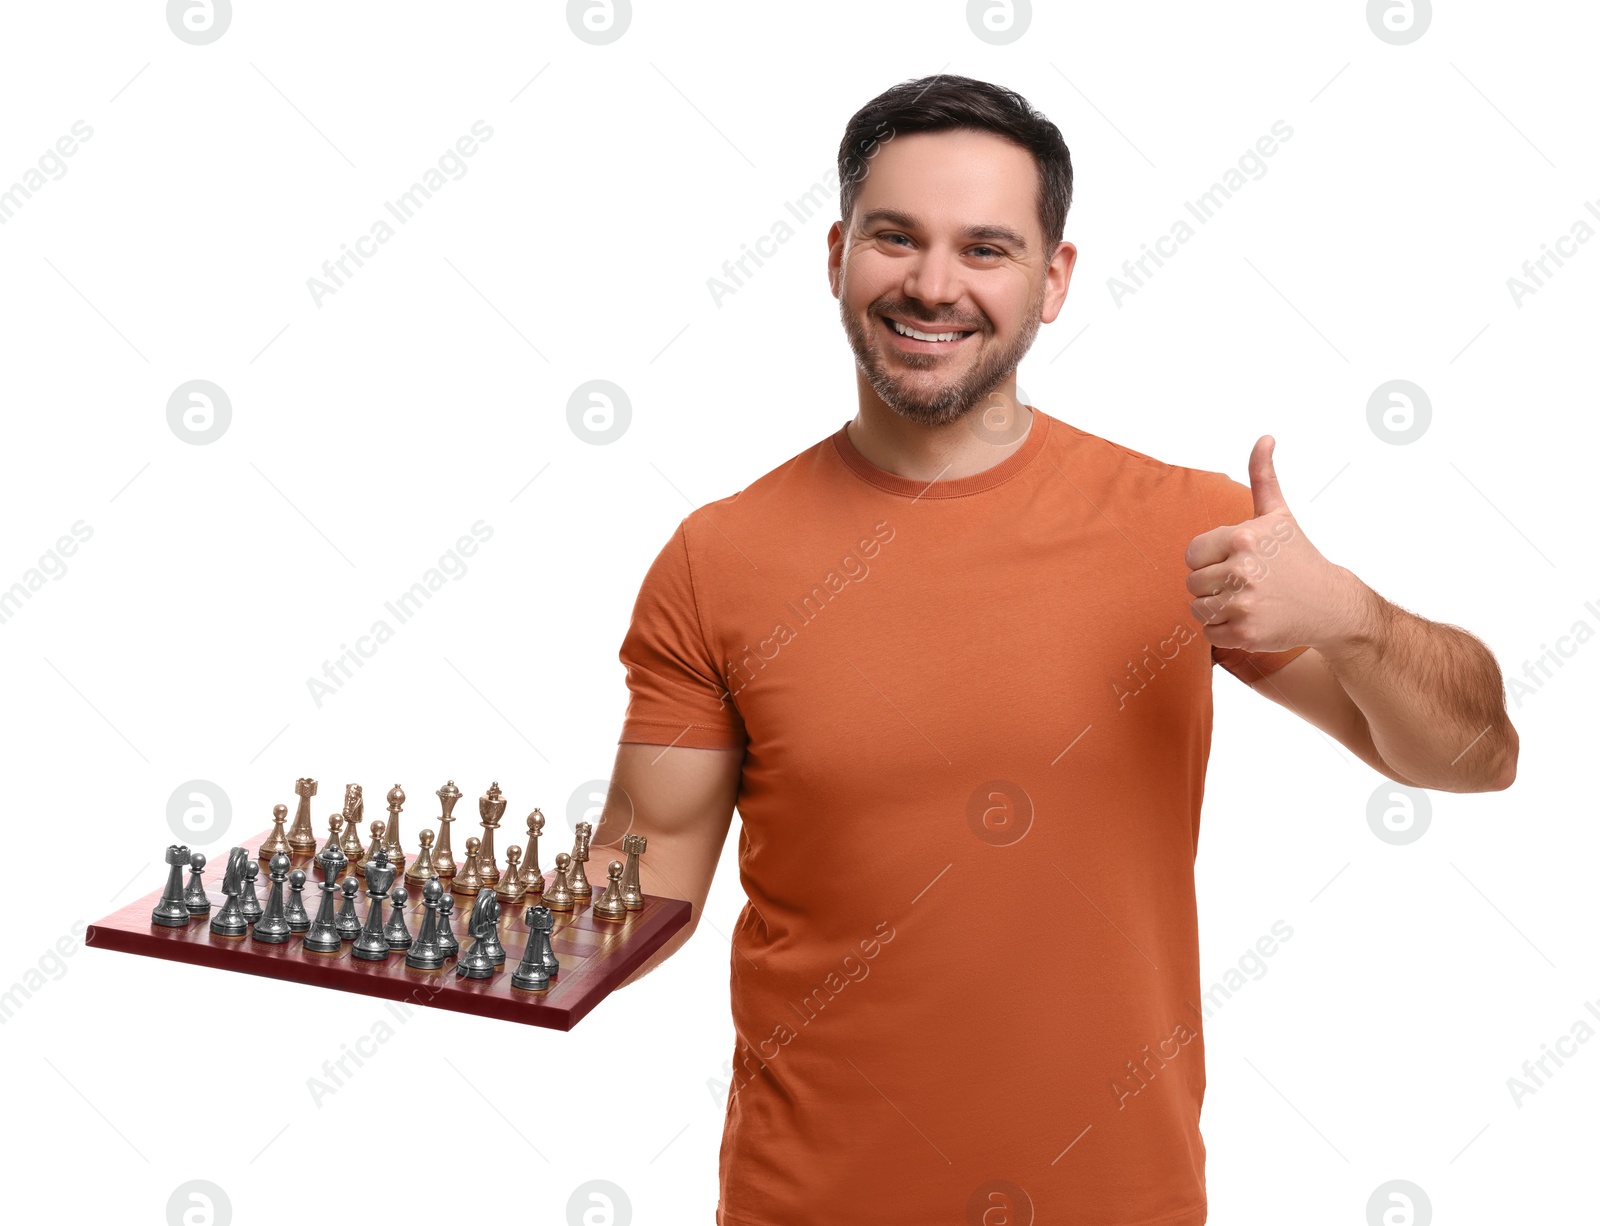 Photo of Smiling man holding chessboard with game pieces and showing thumbs up on white background